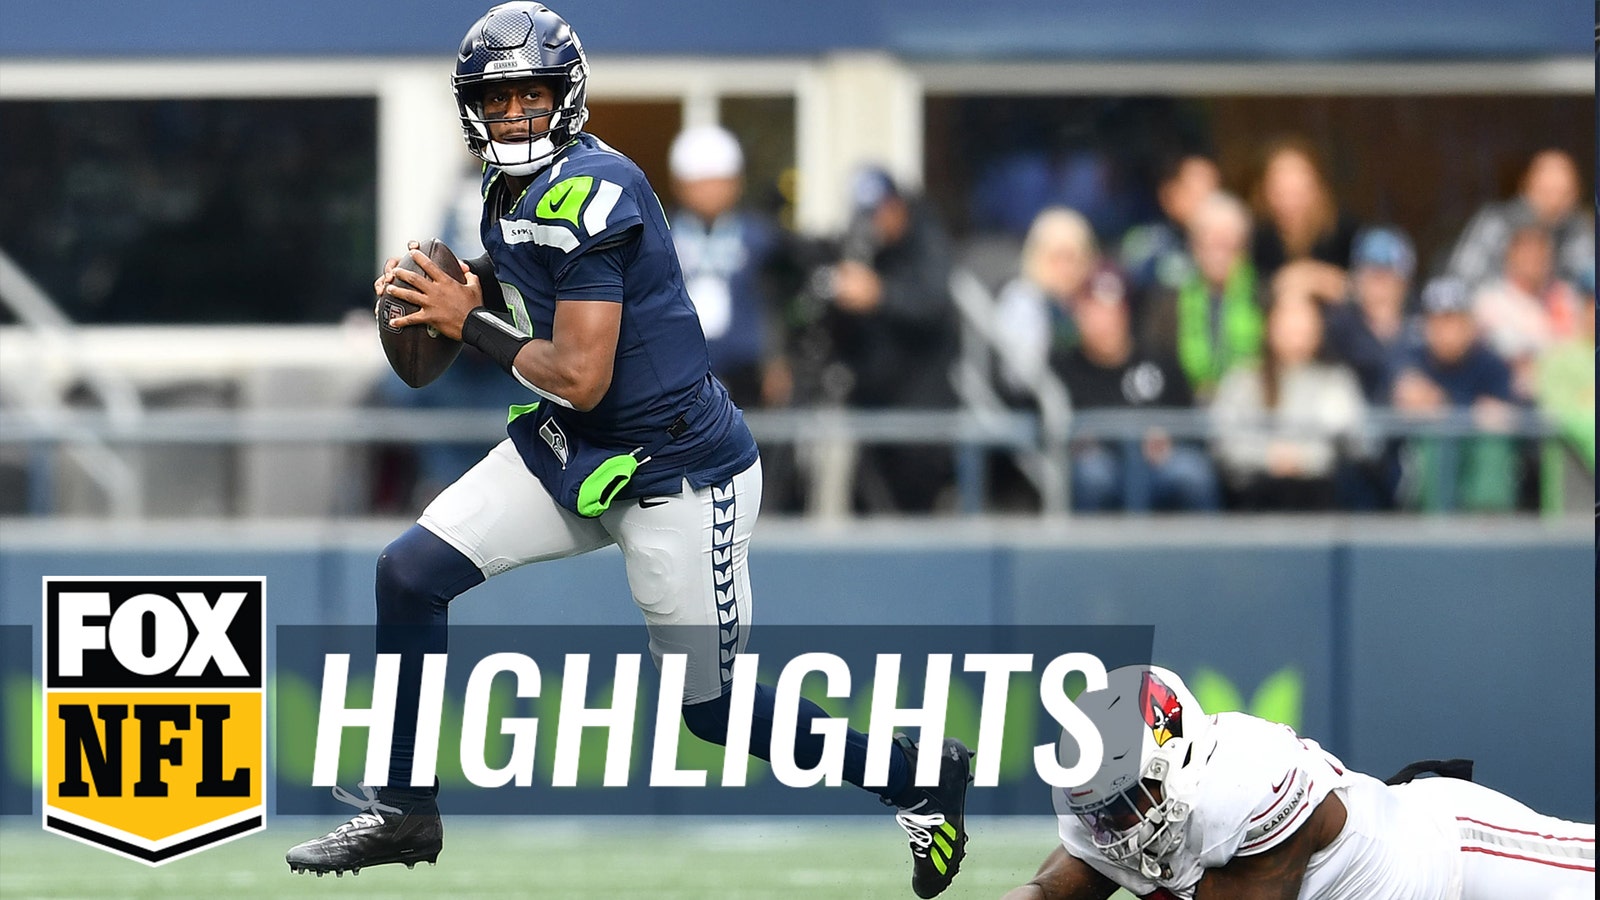 Geno Smith throws two touchdowns for 219 yards, Seahawks win 20-10 over Cardinals